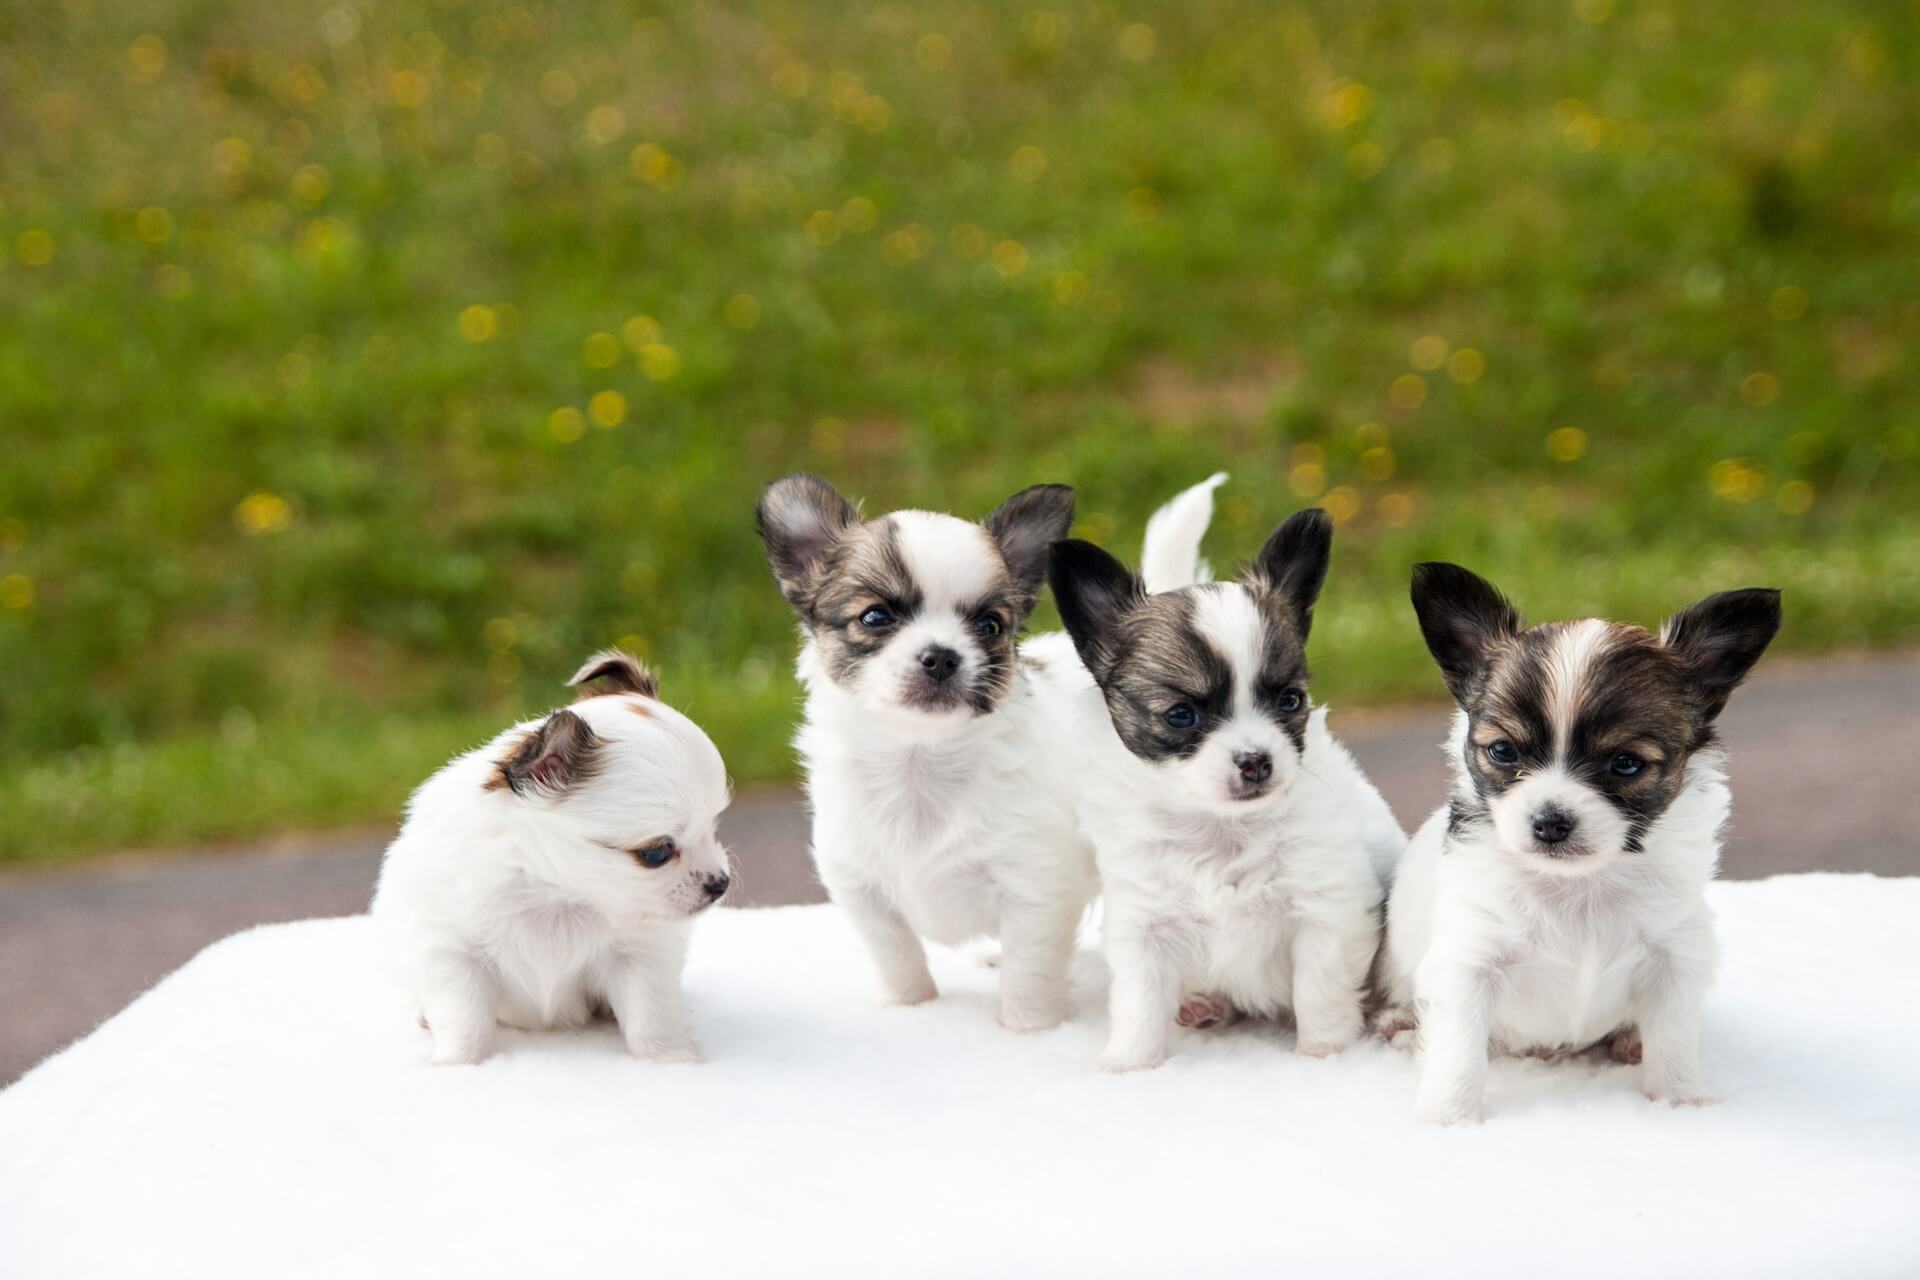 How to Choose the Right Chihuahua Puppy From the Litter?